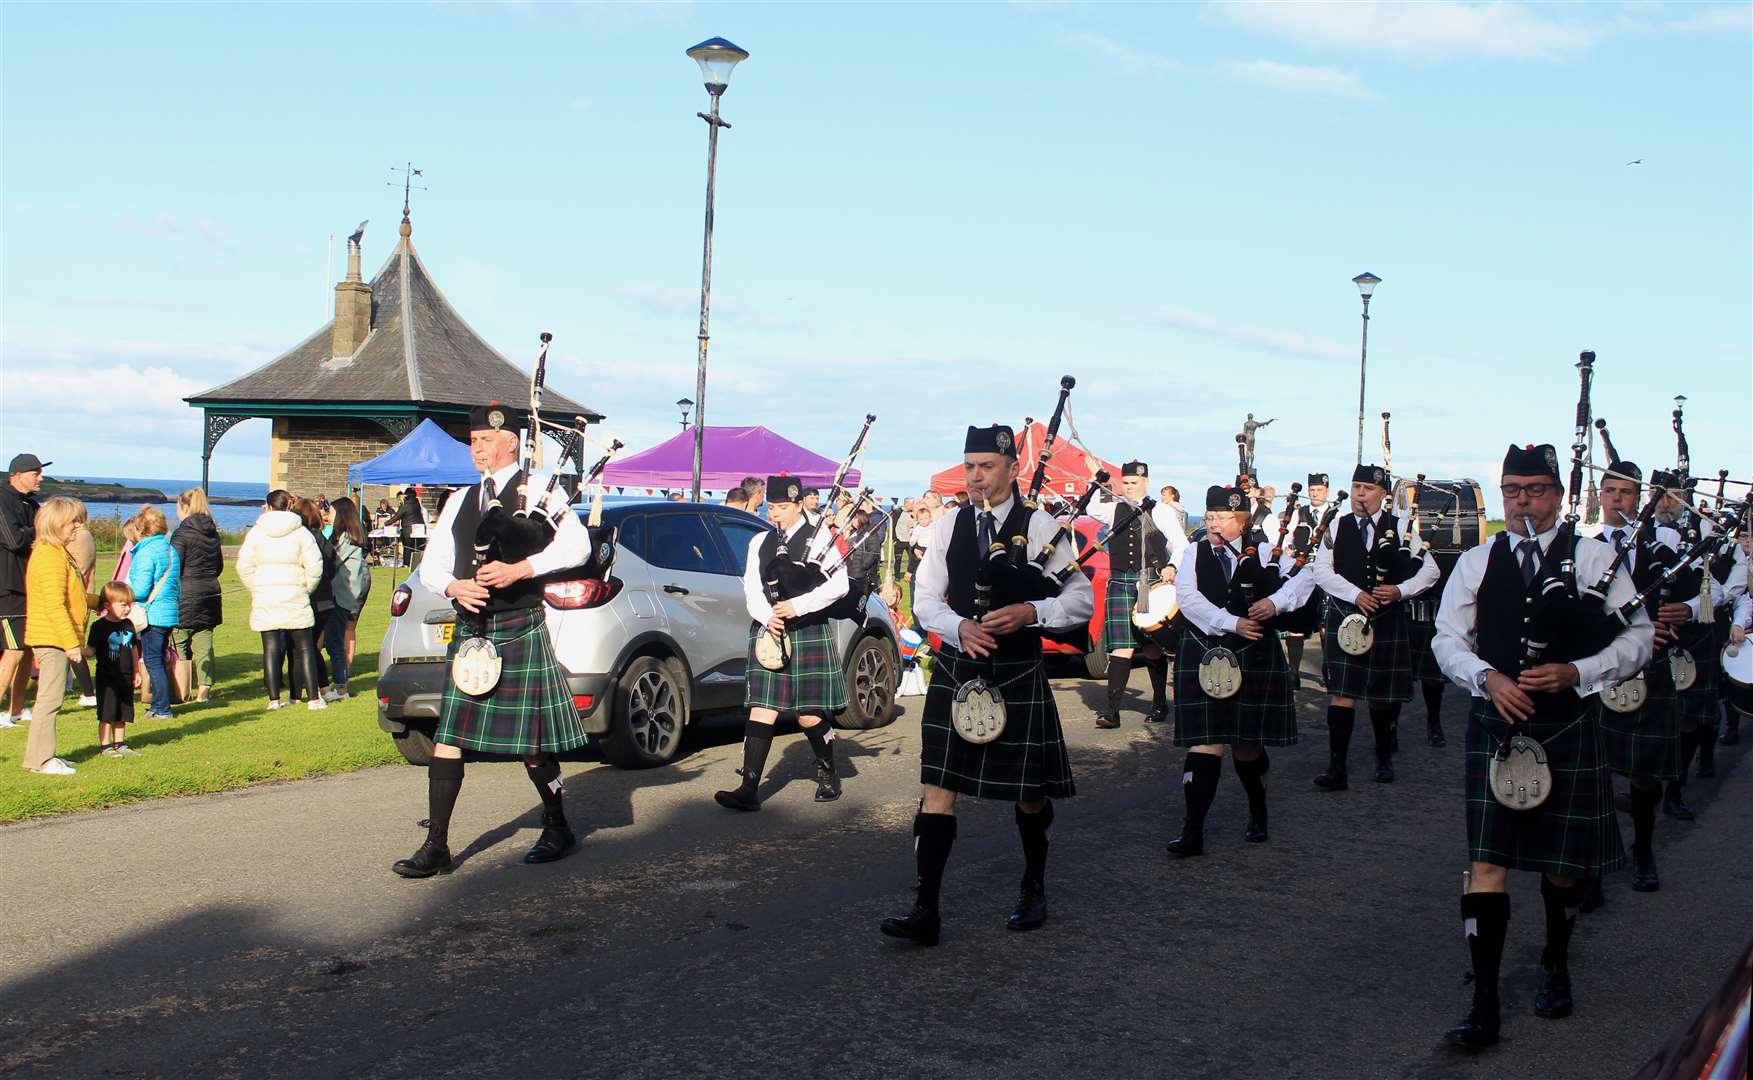 Wick RBLS Pipe band played at the start of the event.